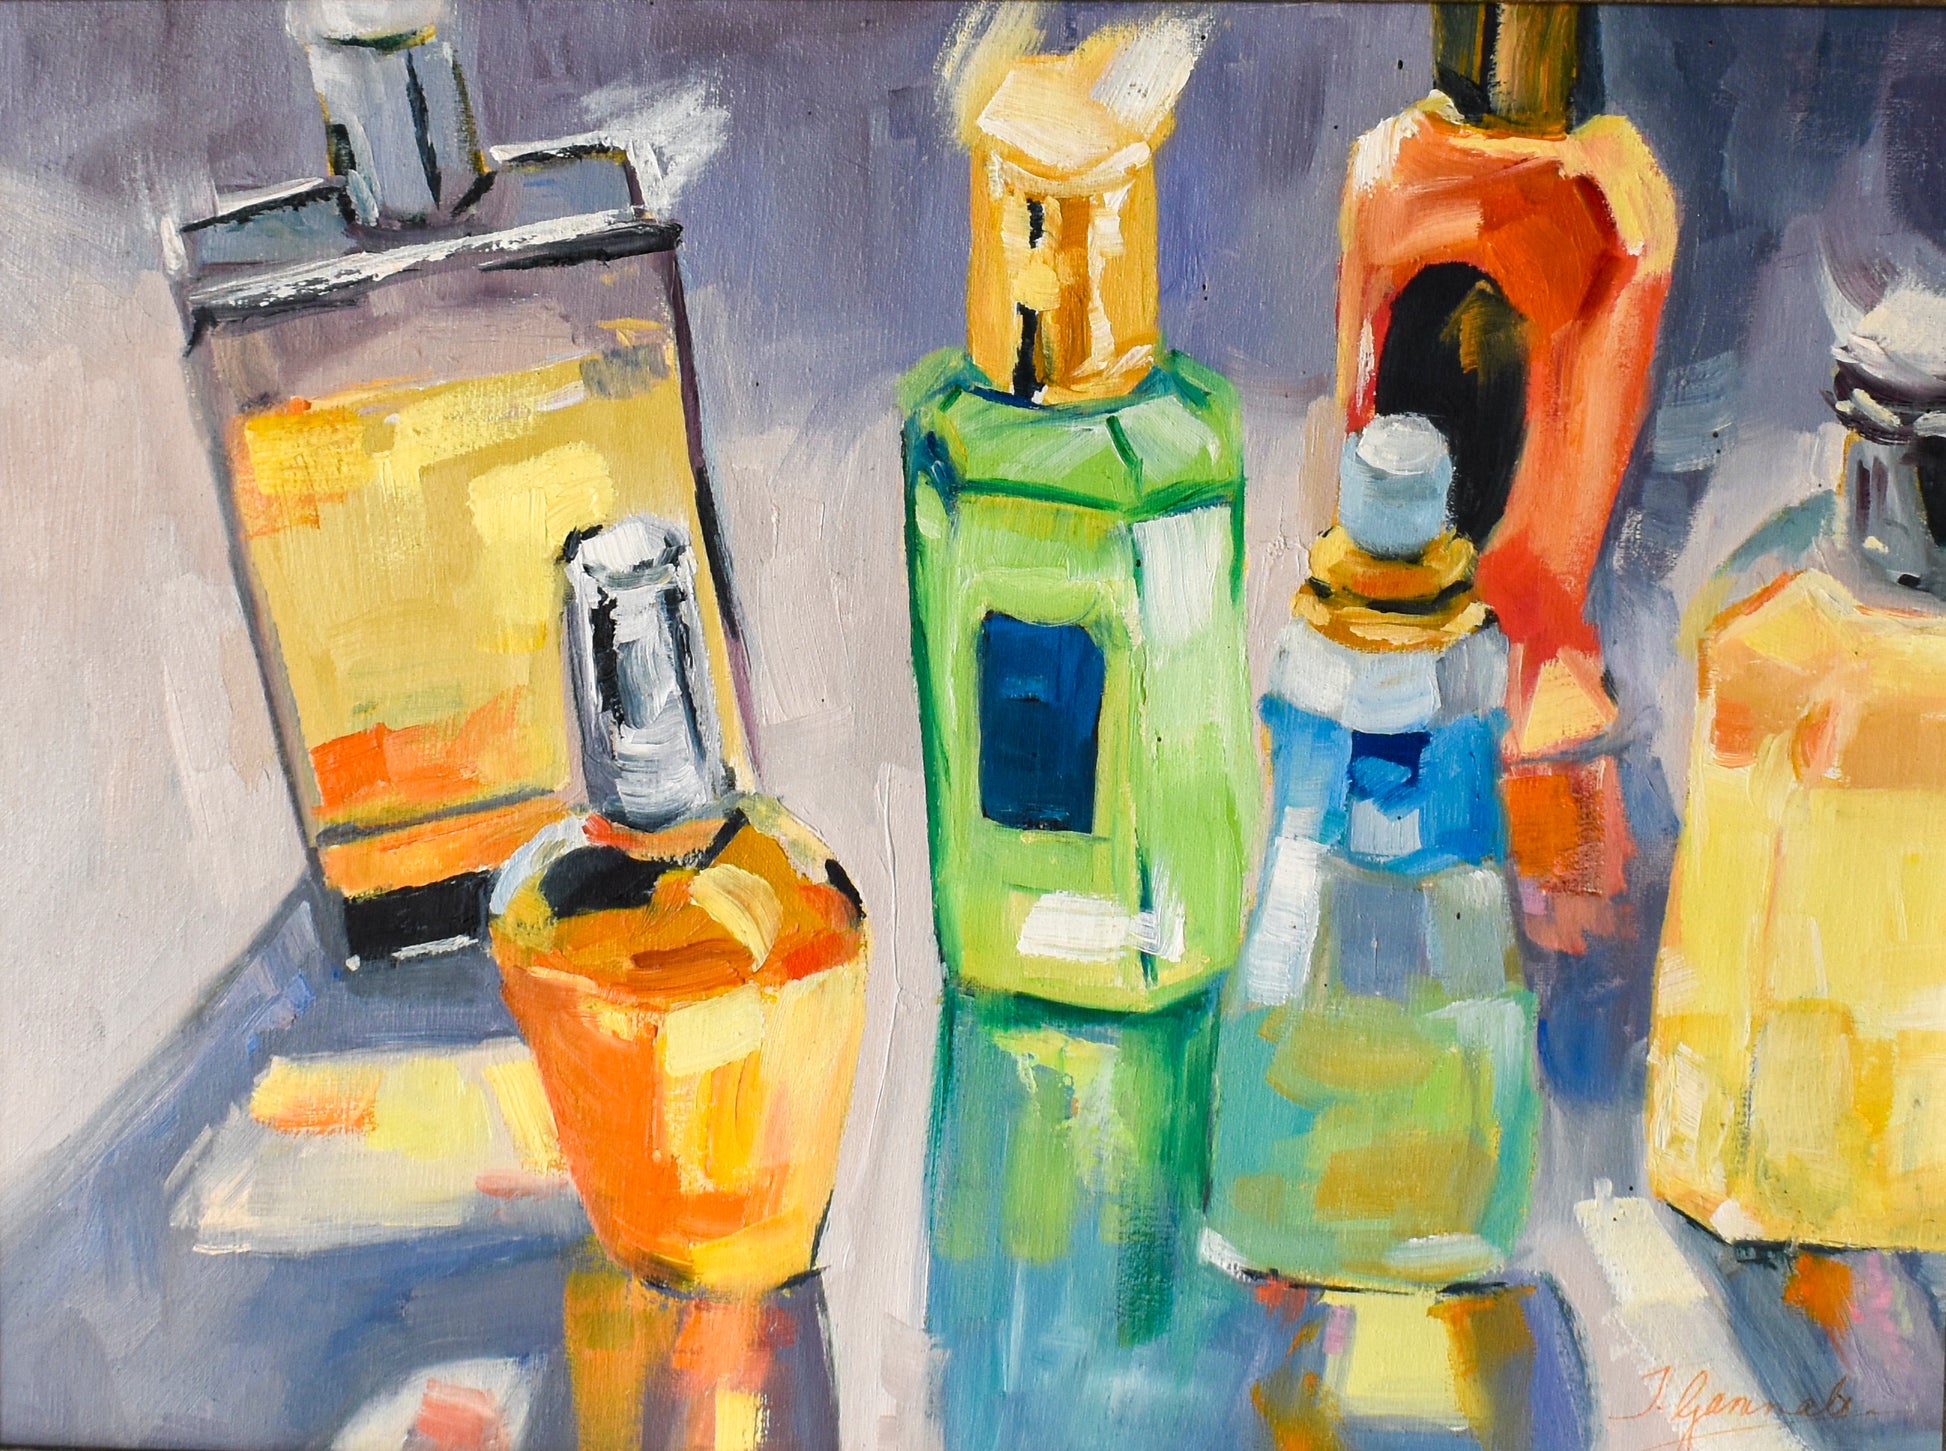 Six perfume bottles, backlit brings out shadows and light. The bottles are yellow, green, oranged and blue.